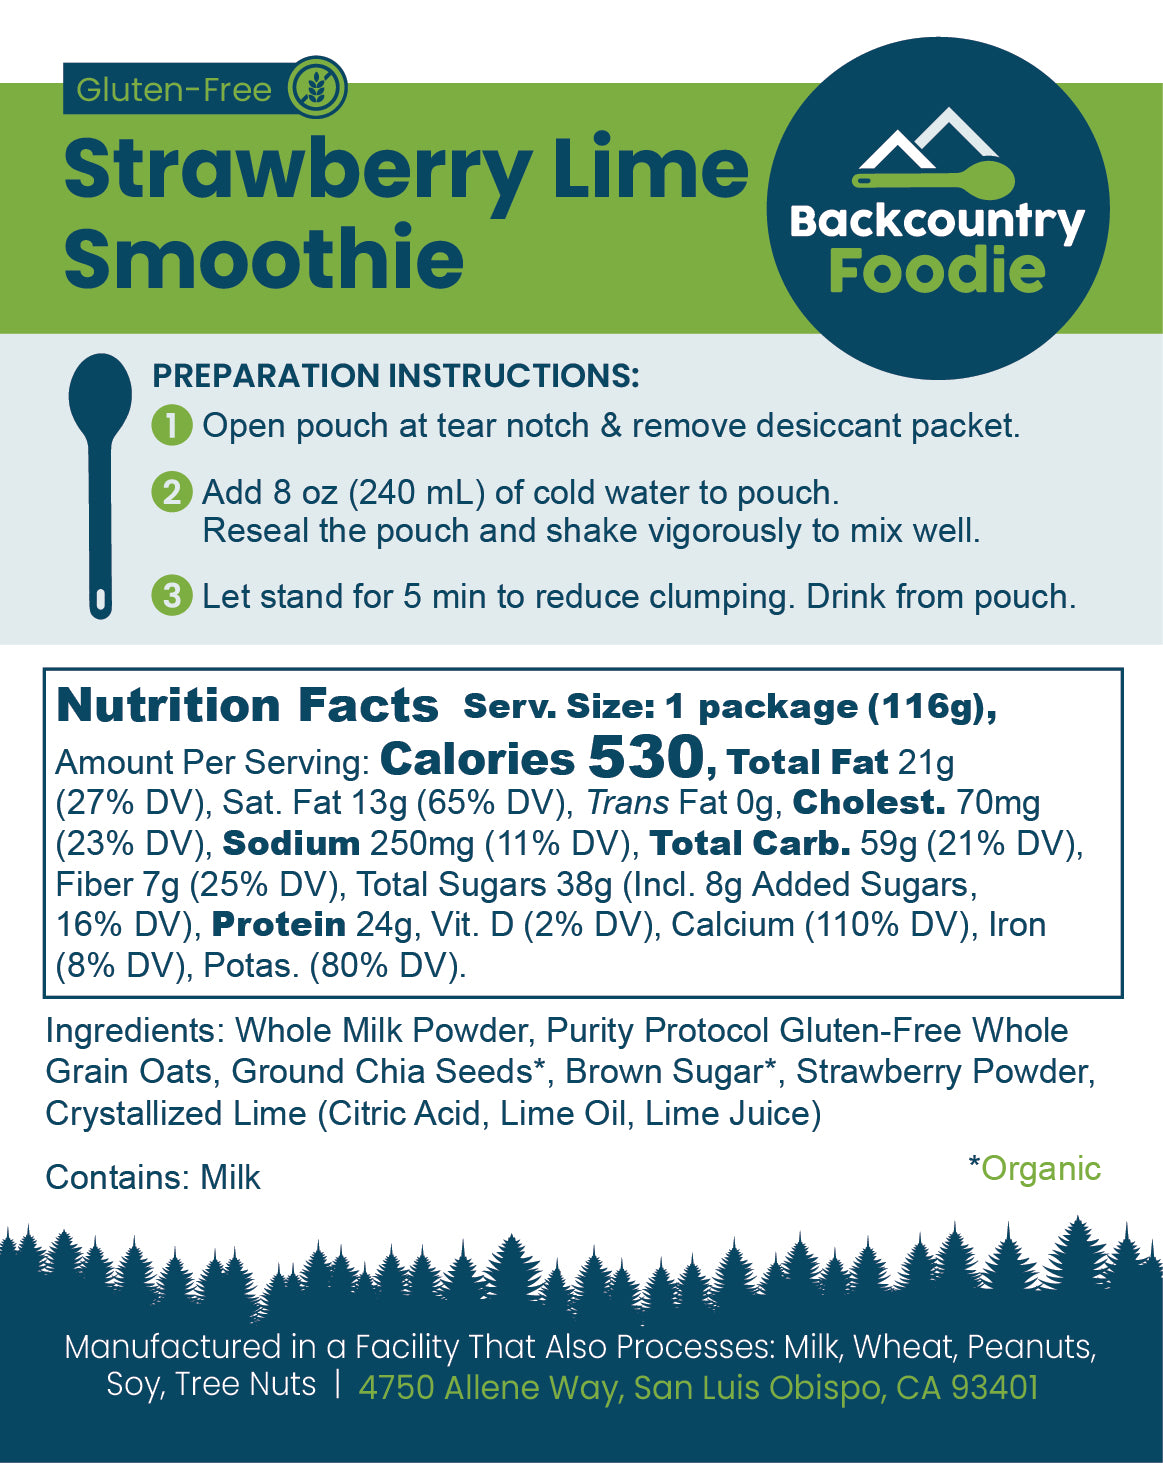 Backcountry Foodie - Strawberry Lime Smoothie, Gluten-Free